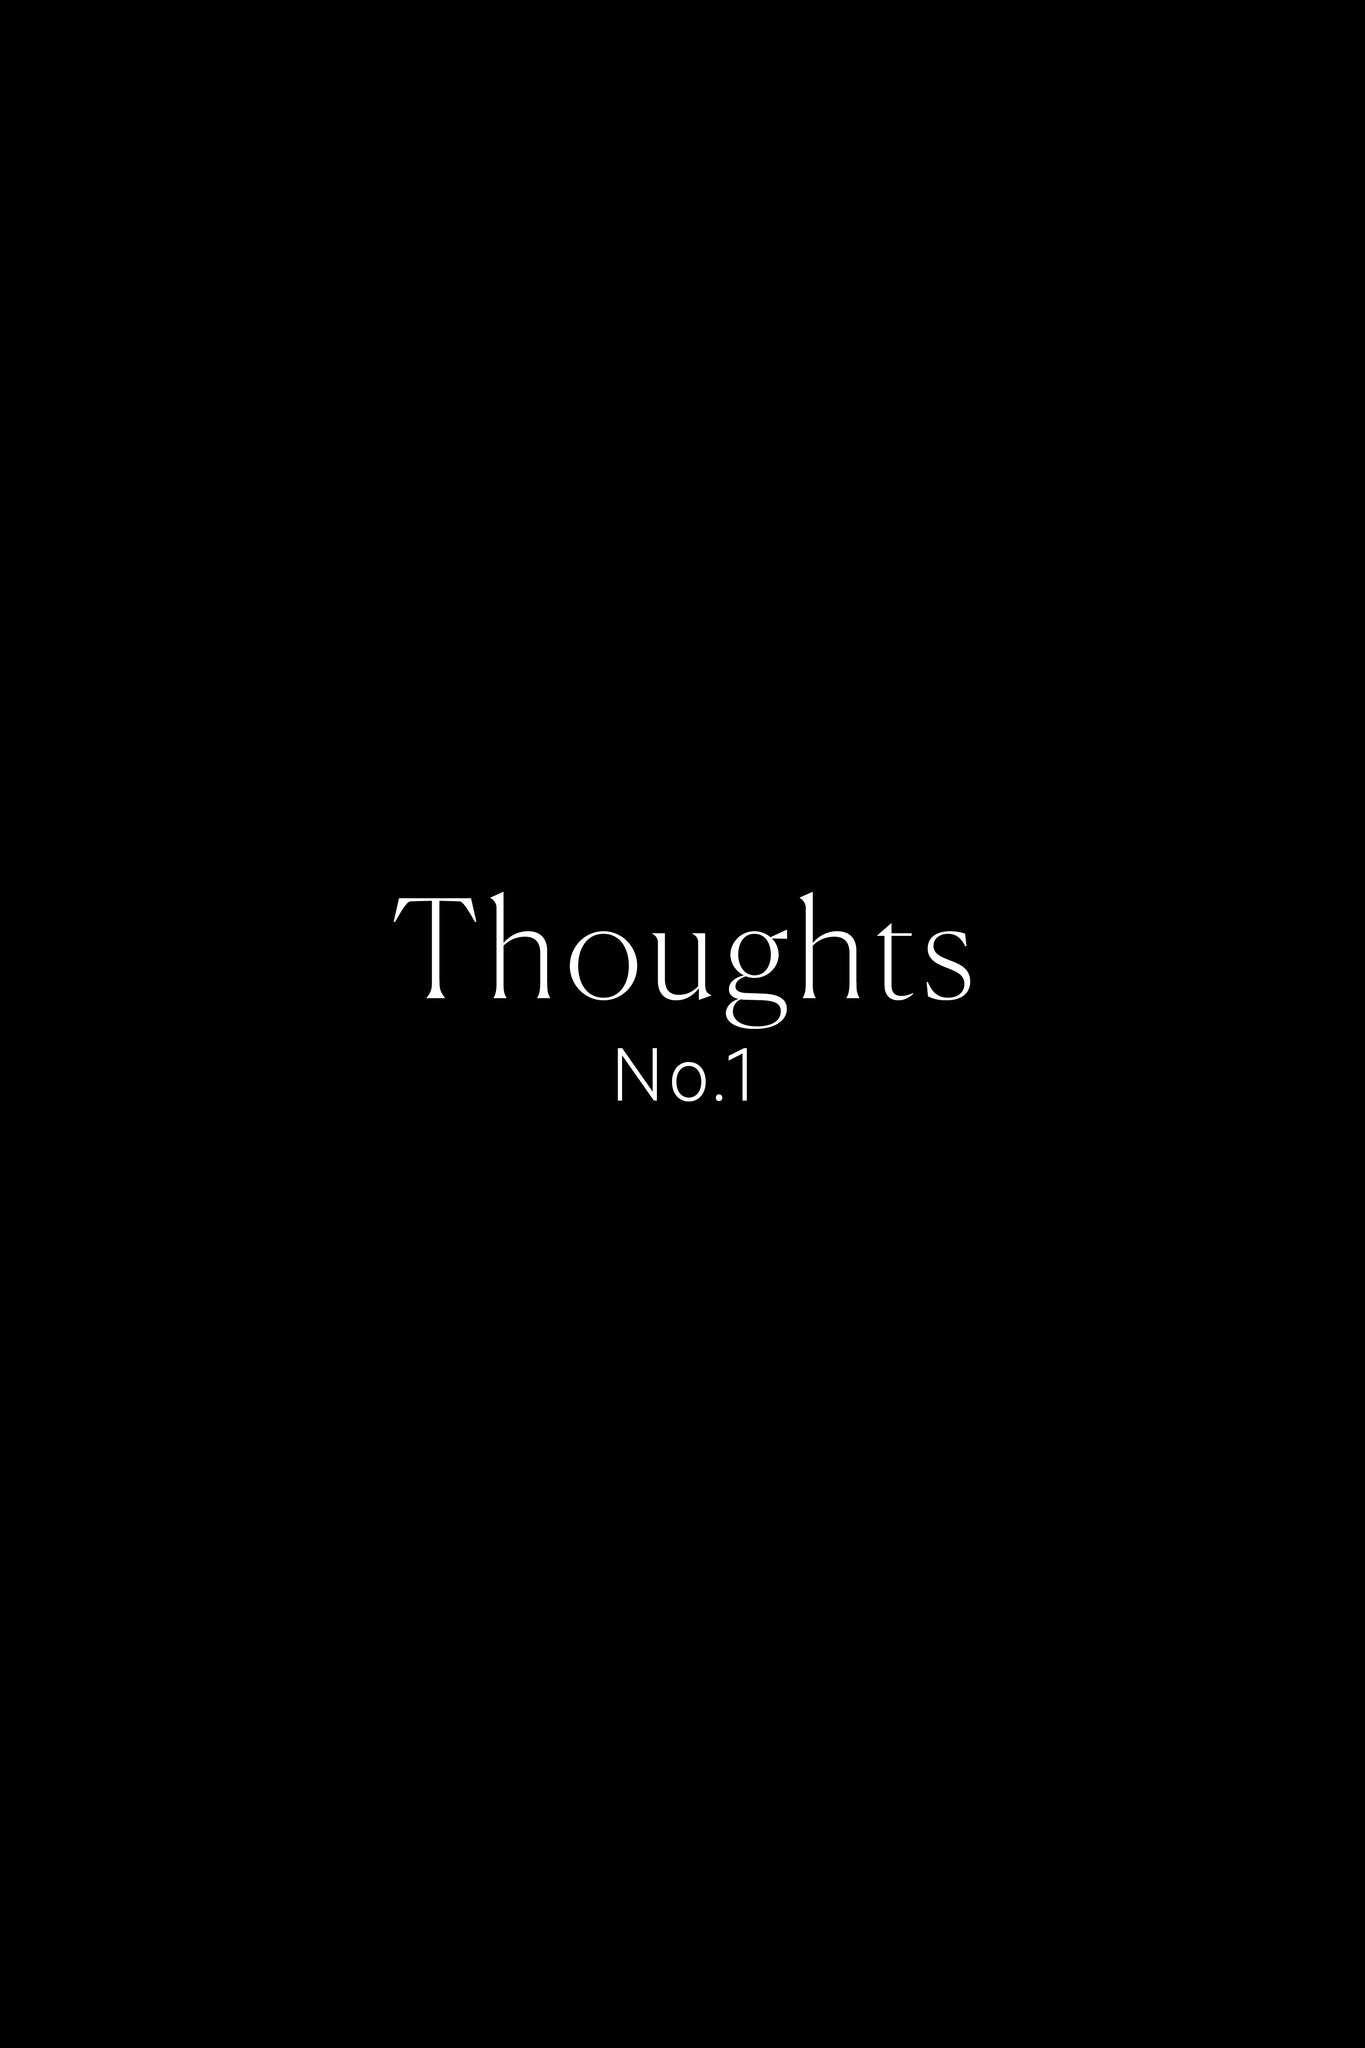 Thoughts – No.1